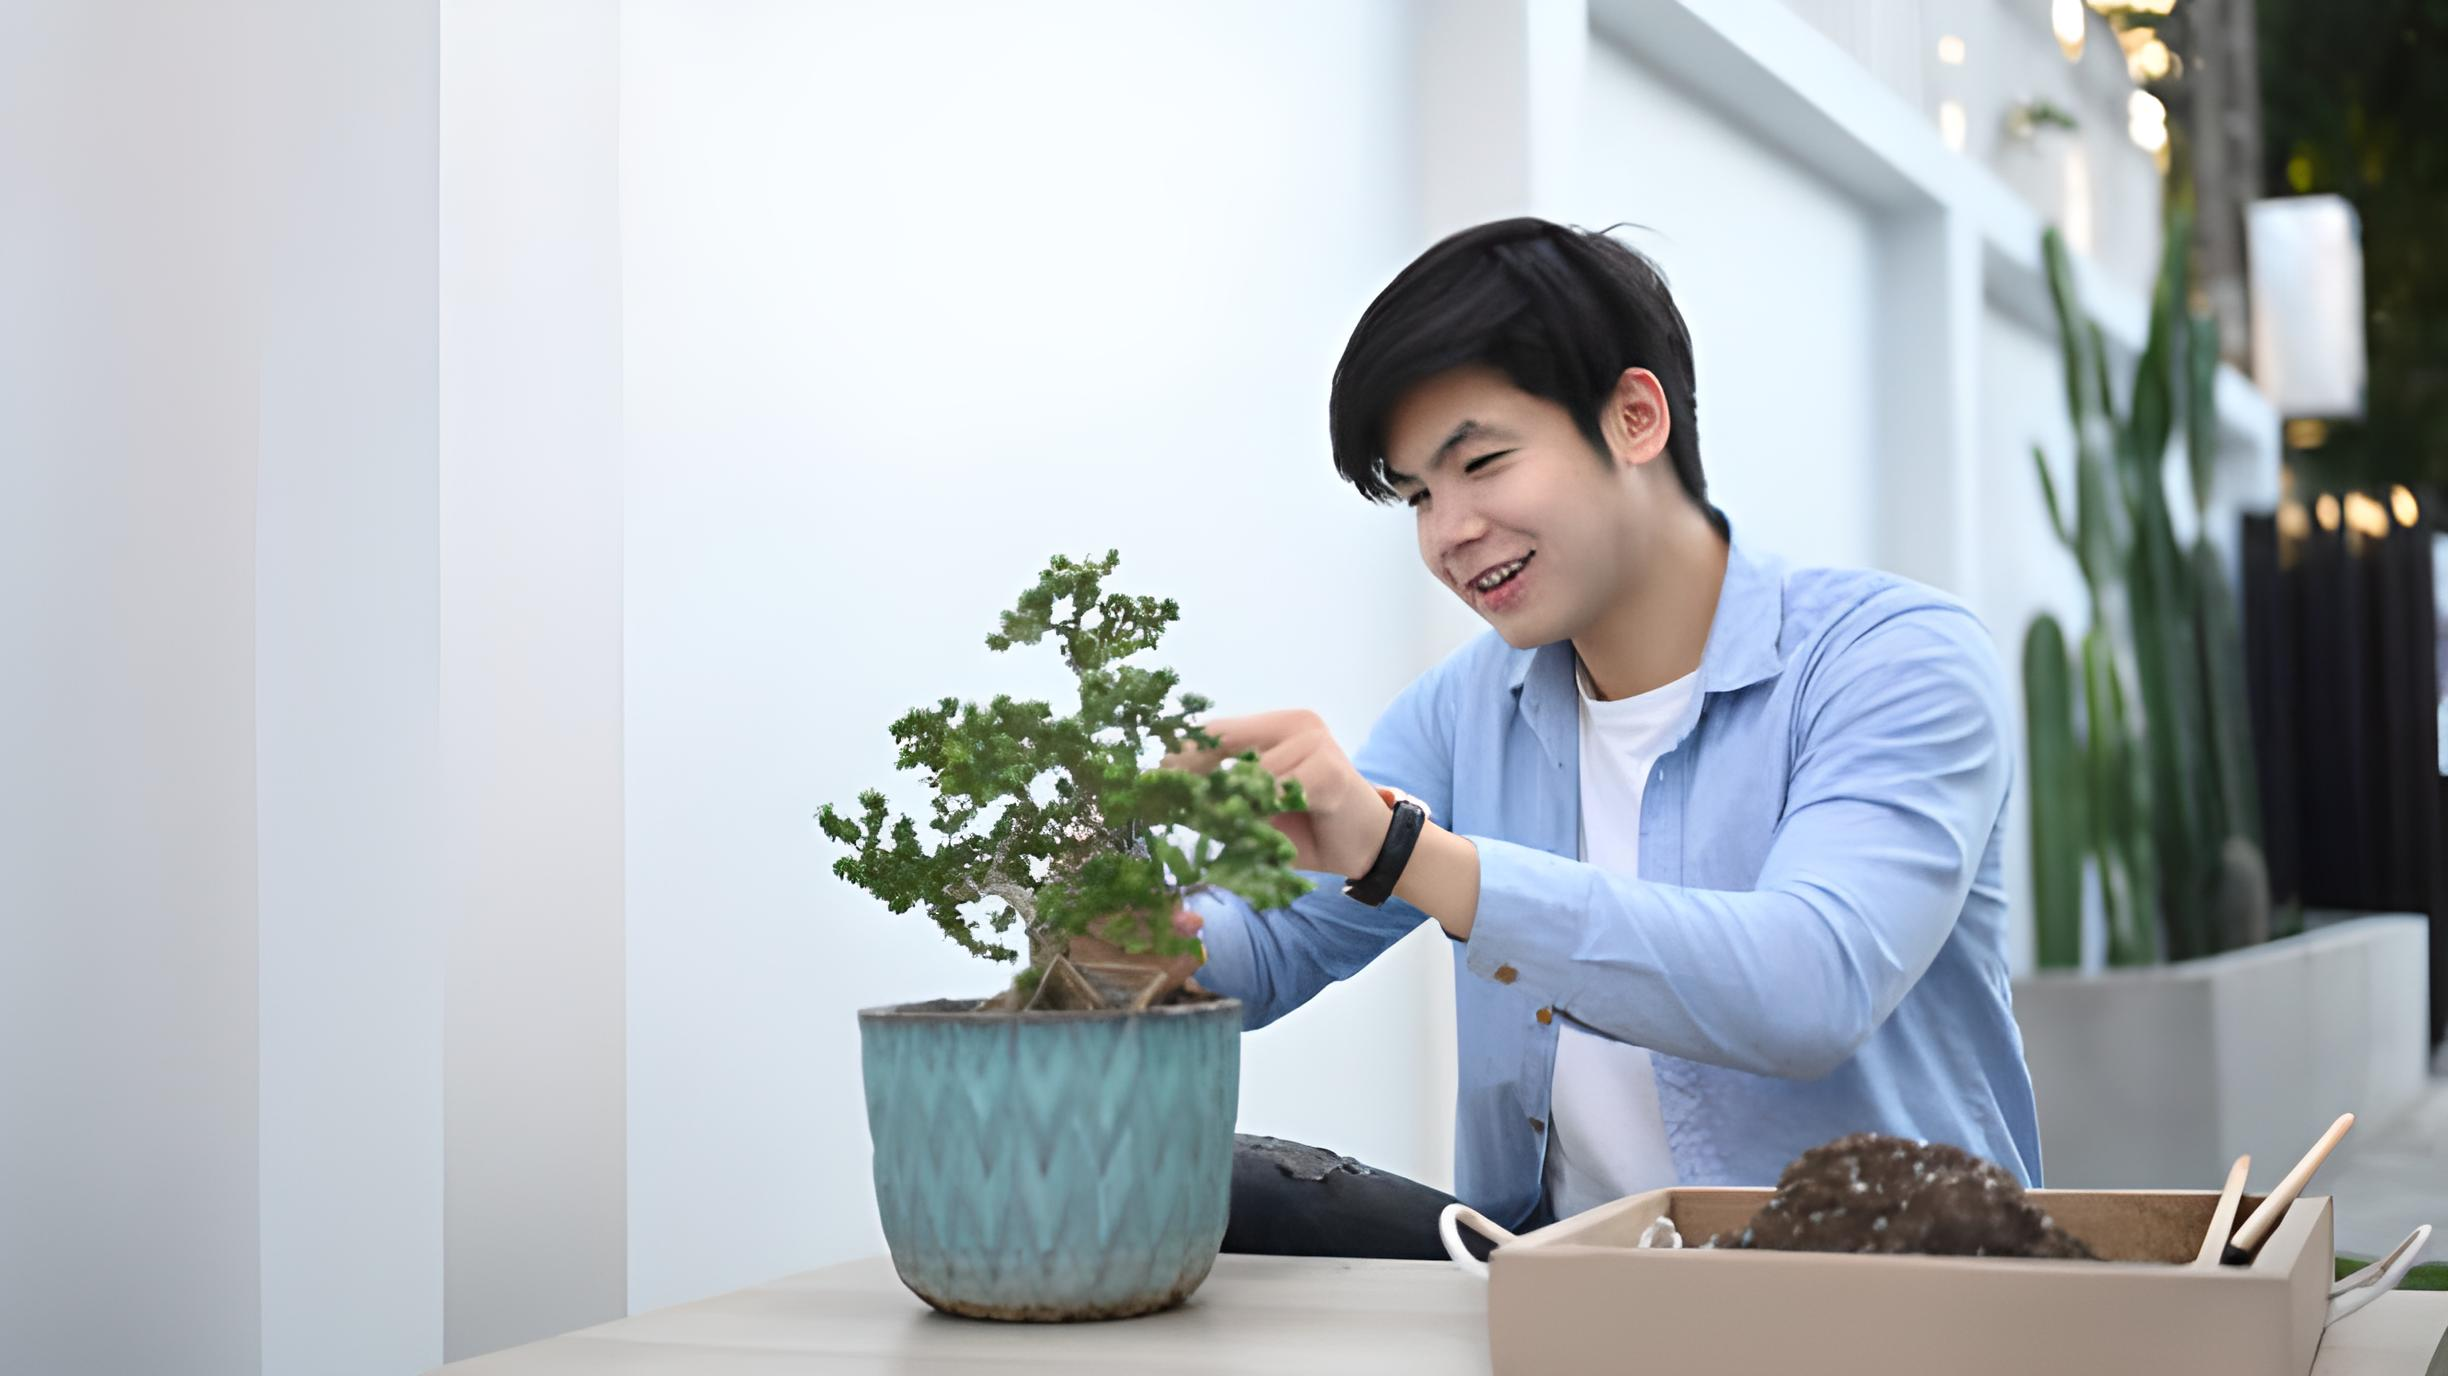 A person smiling while tending to a bonsai tree, reflecting the effects of bonsai care on mental health.